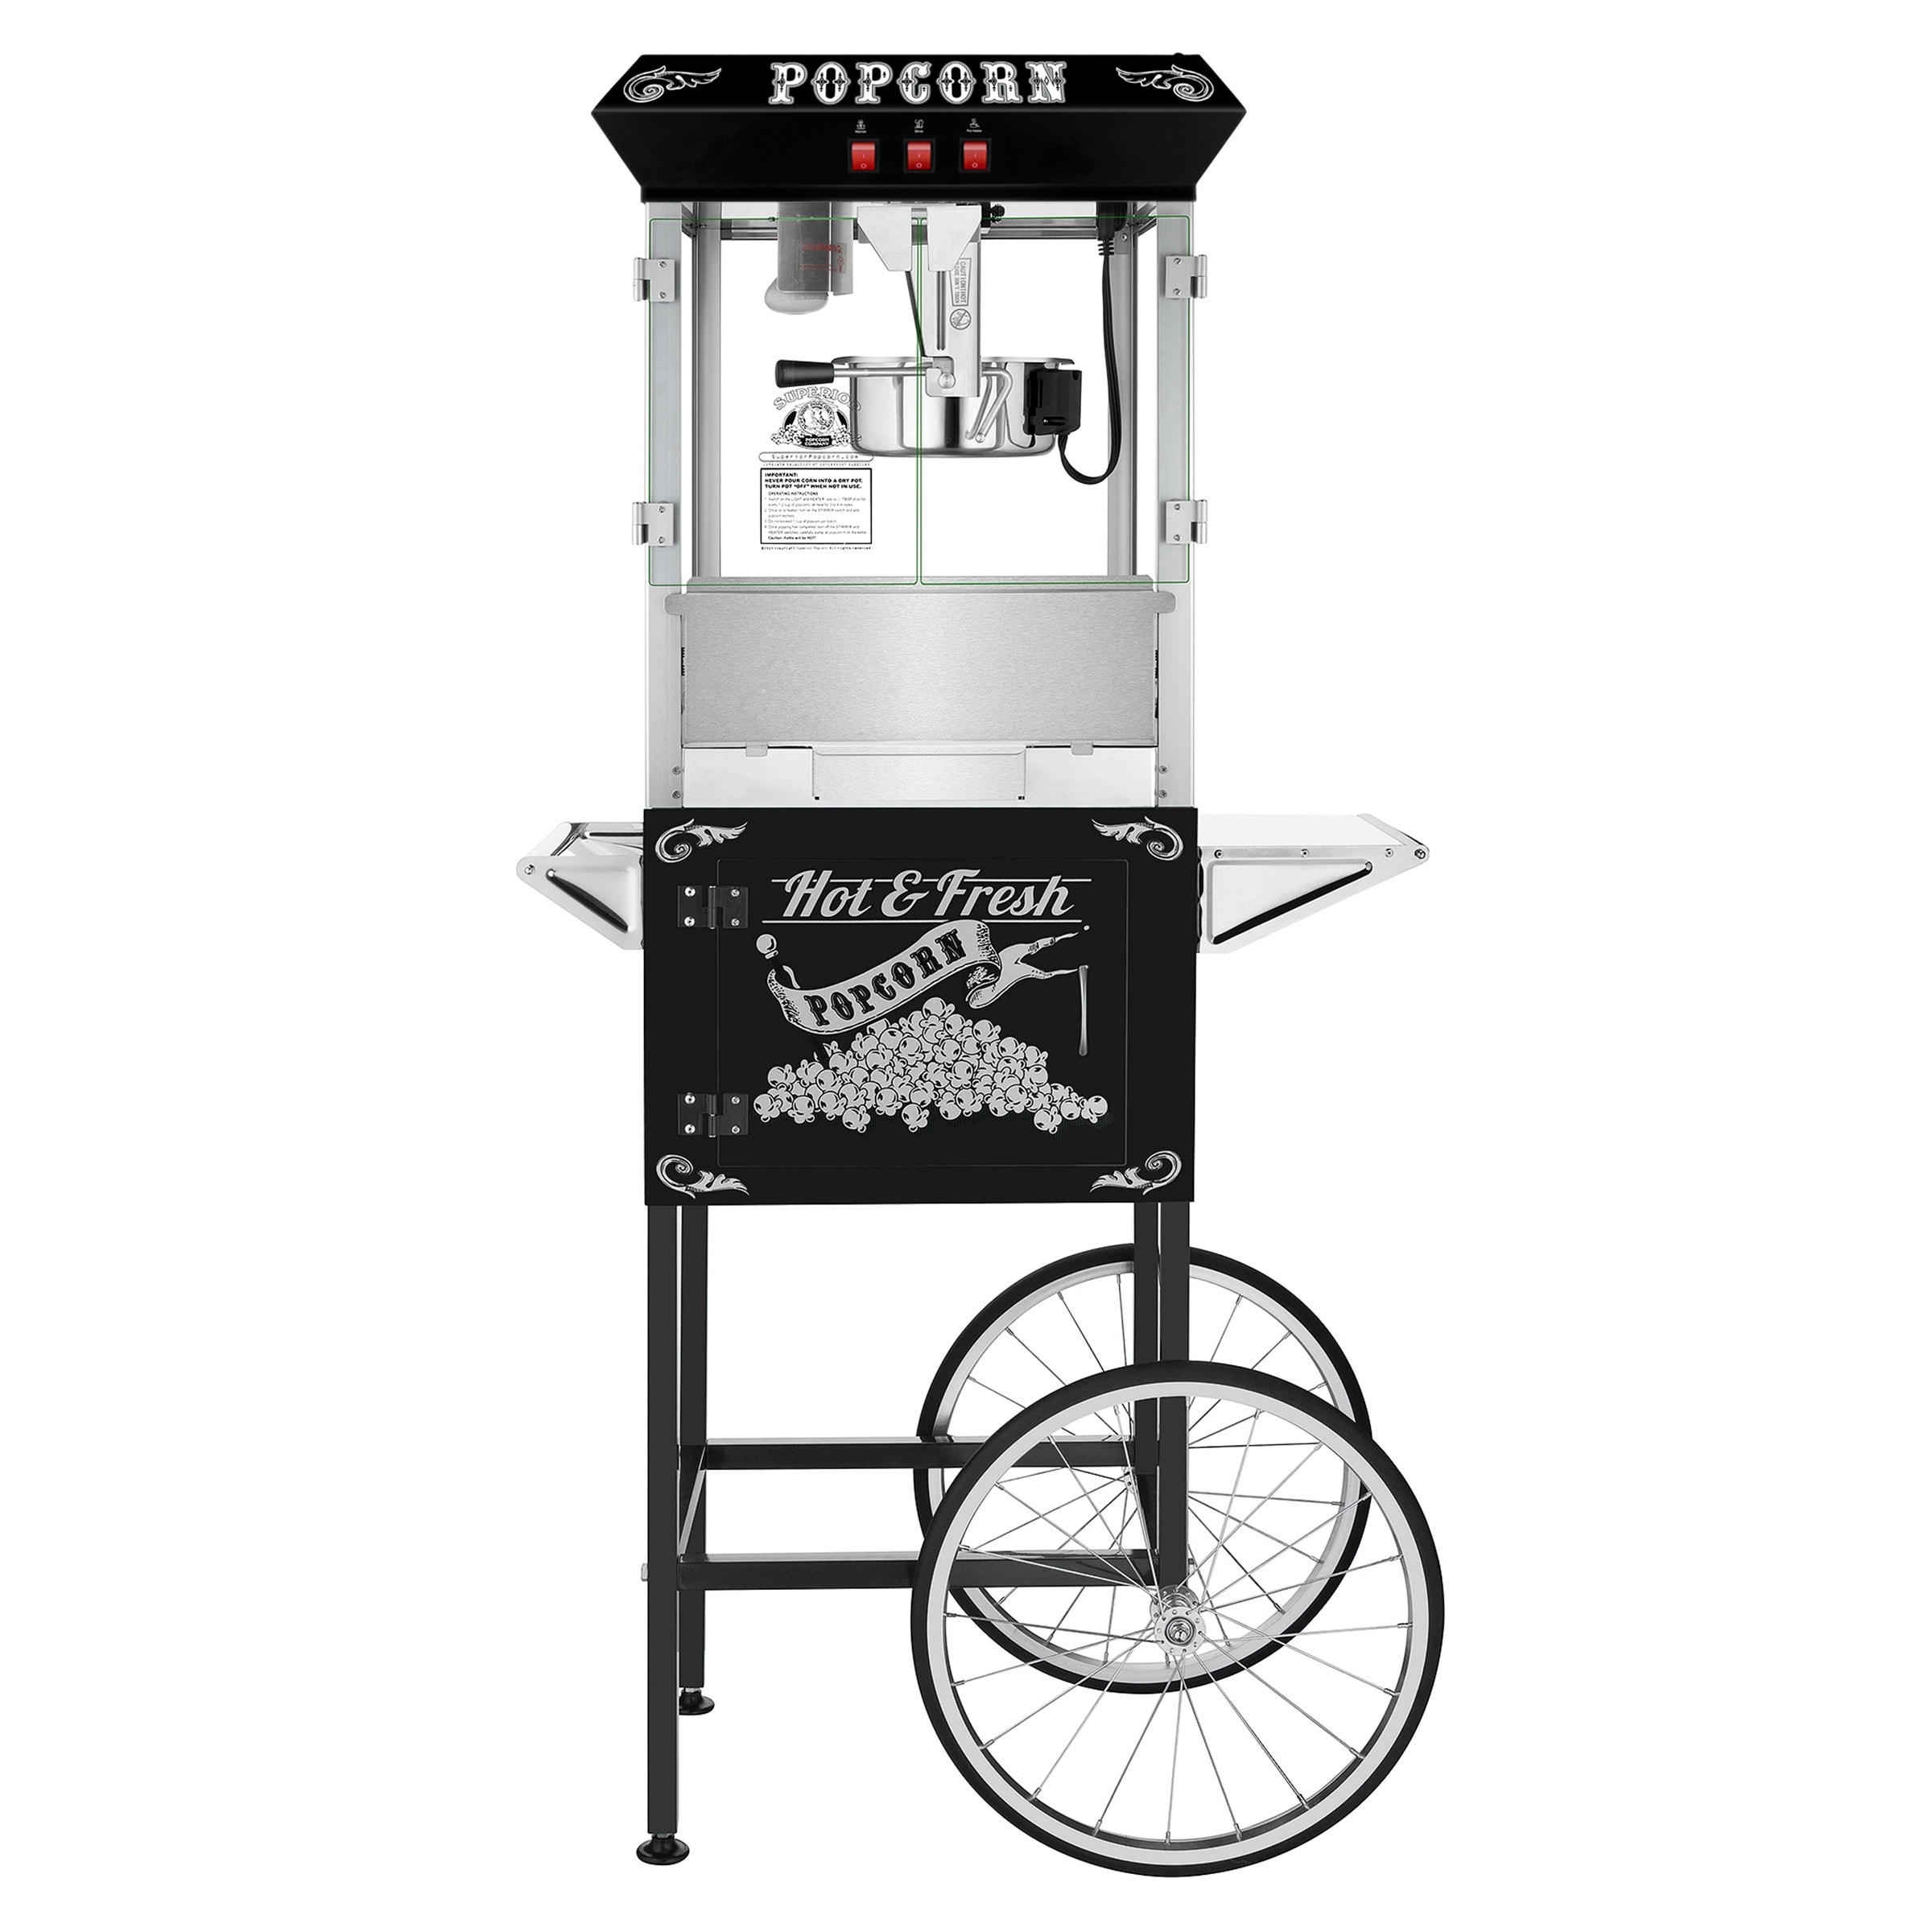 https://ak1.ostkcdn.com/images/products/is/images/direct/95019e60f6f4b52815b8888d8bc43726c28e45f7/Popcorn-Machine-with-Cart-%E2%80%93-8oz-Popper-with-Stainless-steel-Kettle-by-Great-Northern-Popcorn-%28Black%29.jpg